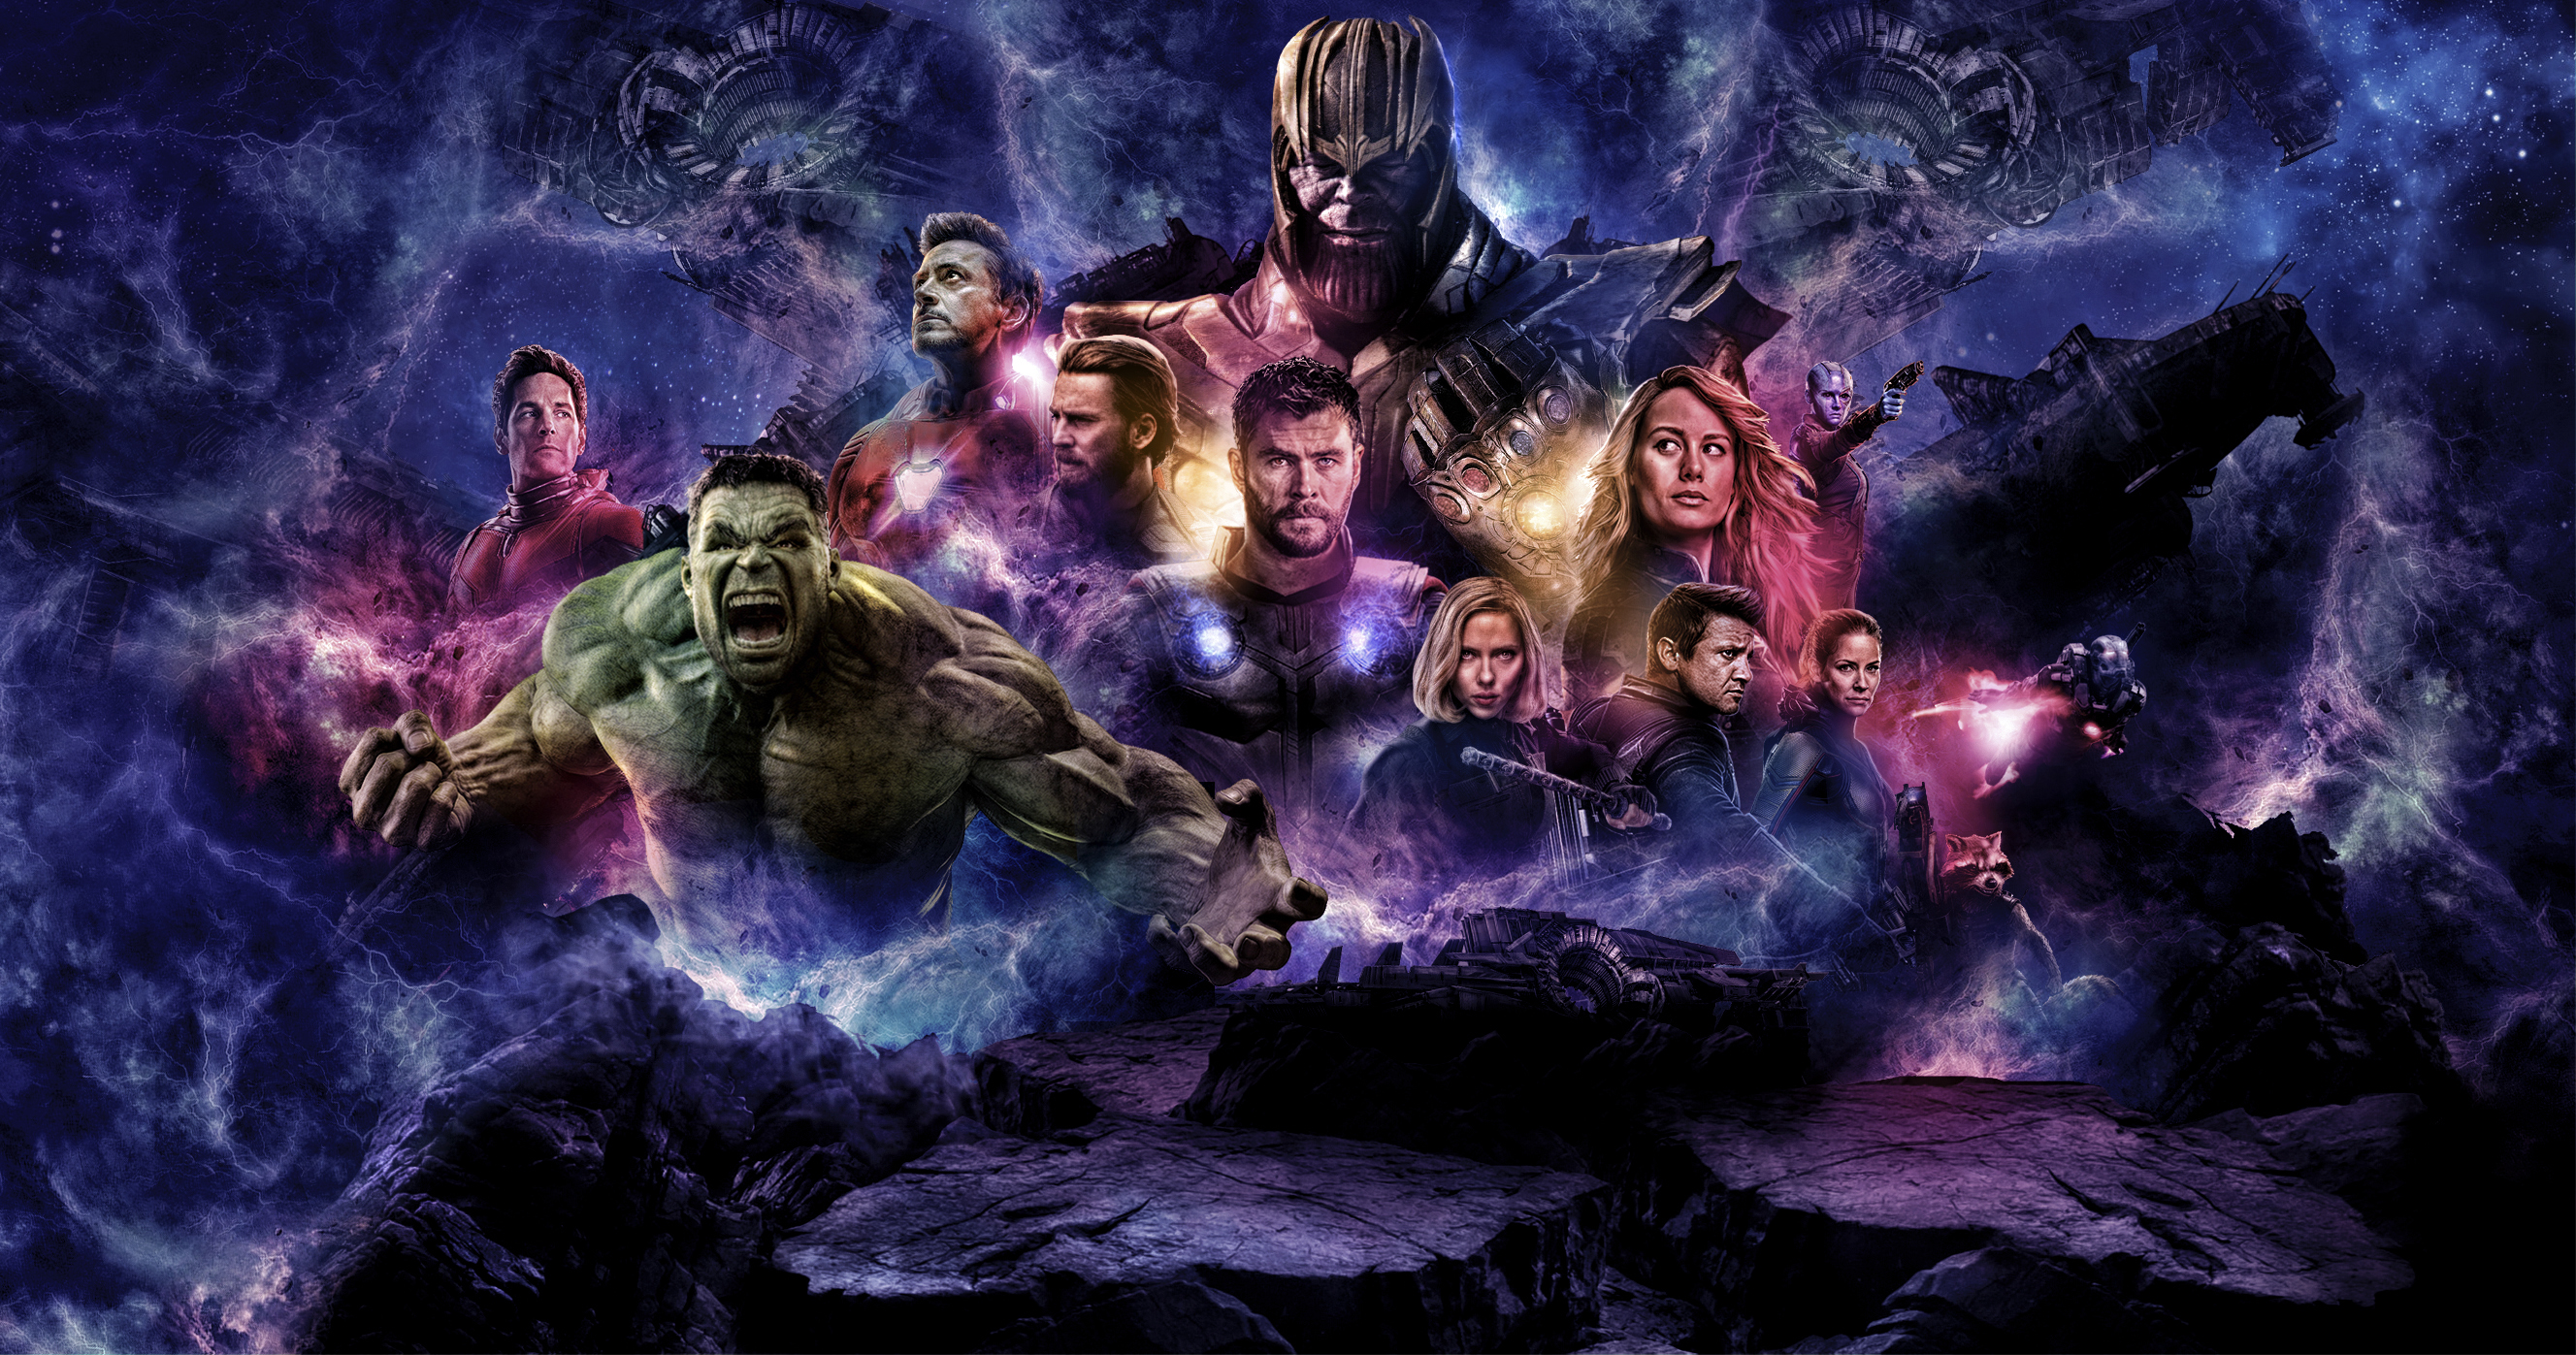 download HD wallpapers of Avengers Endgame 